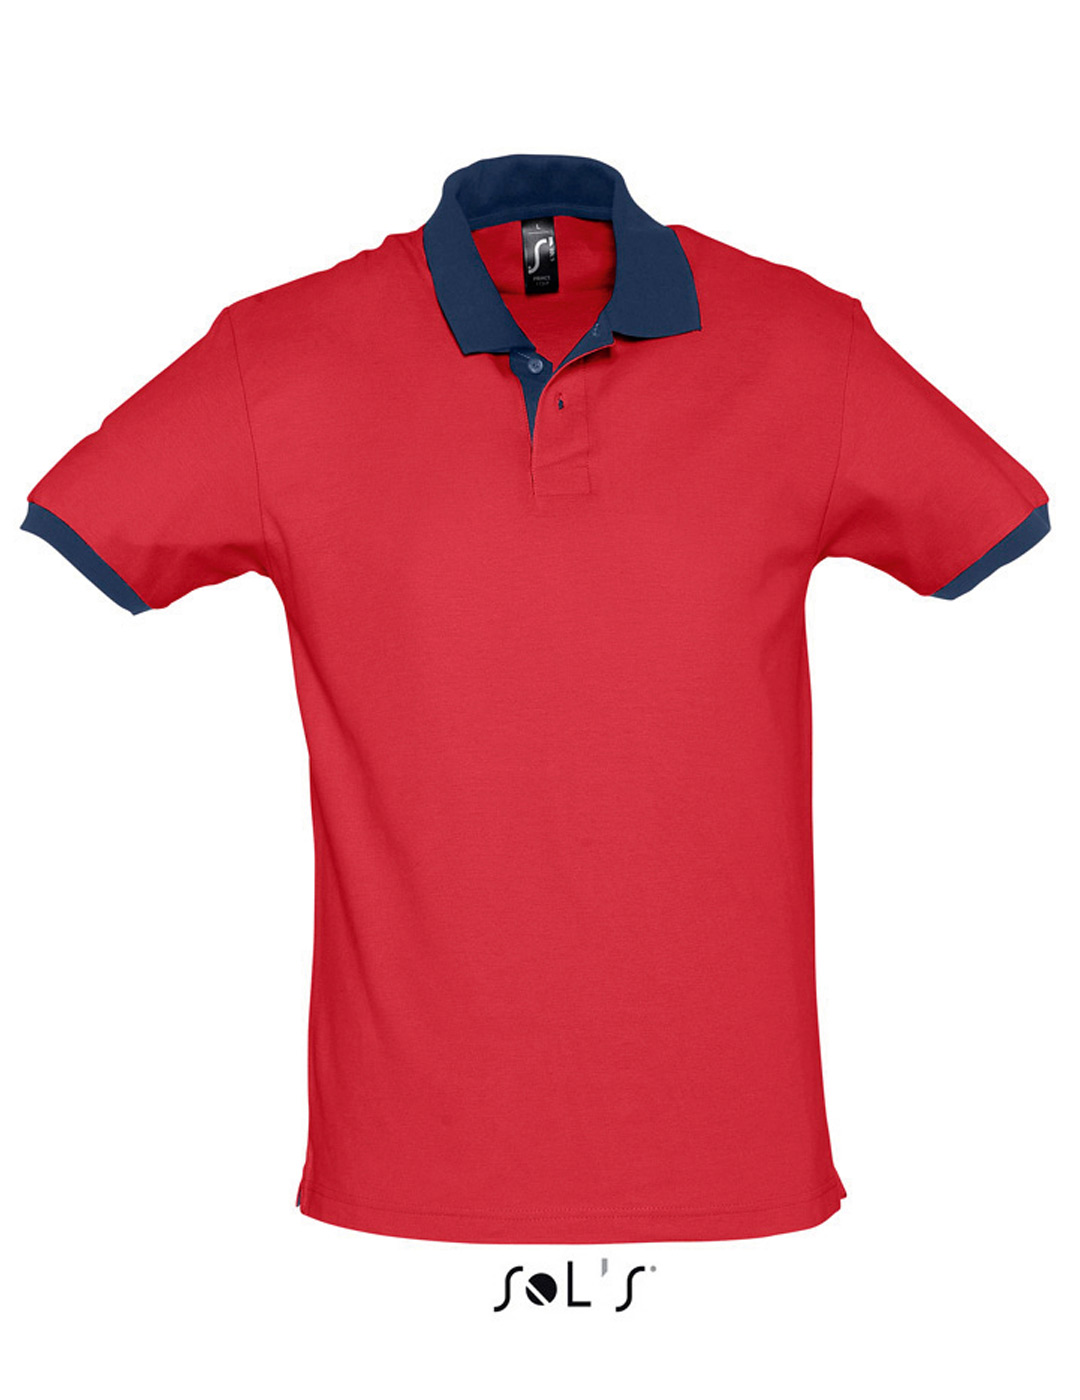 Prince 11369 red french navy a